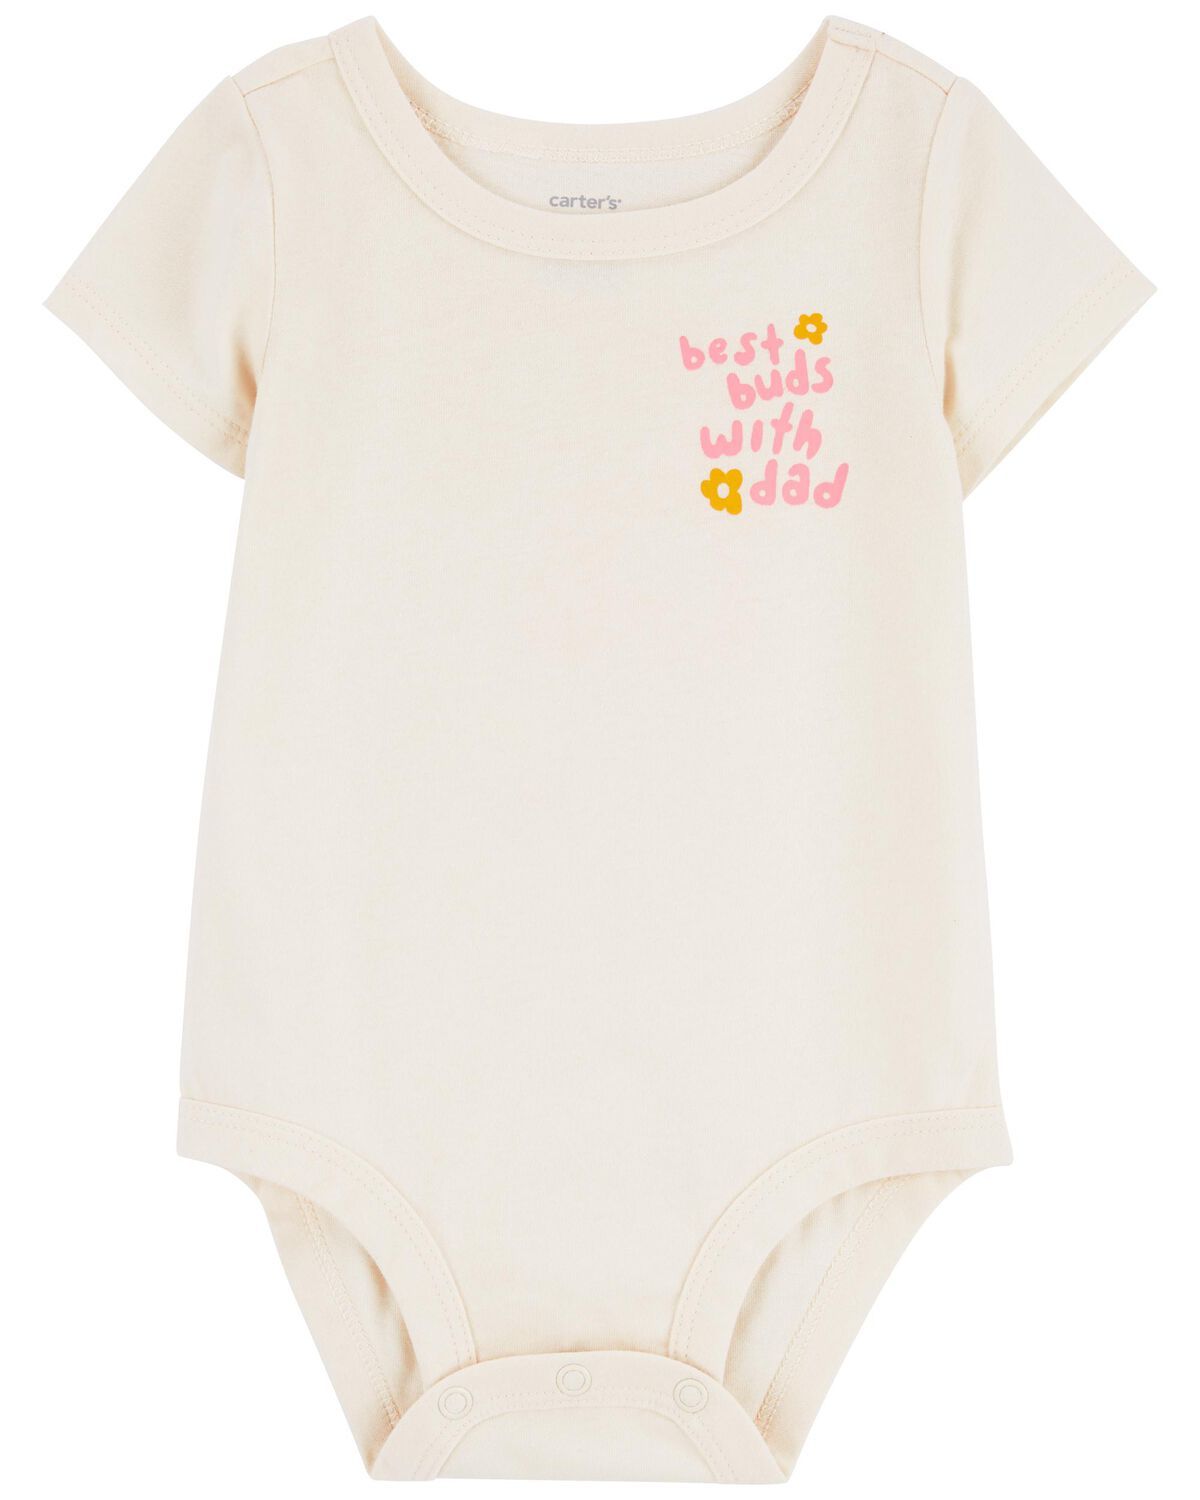 Baby Best Buds With Dad Cotton Bodysuit | Carter's